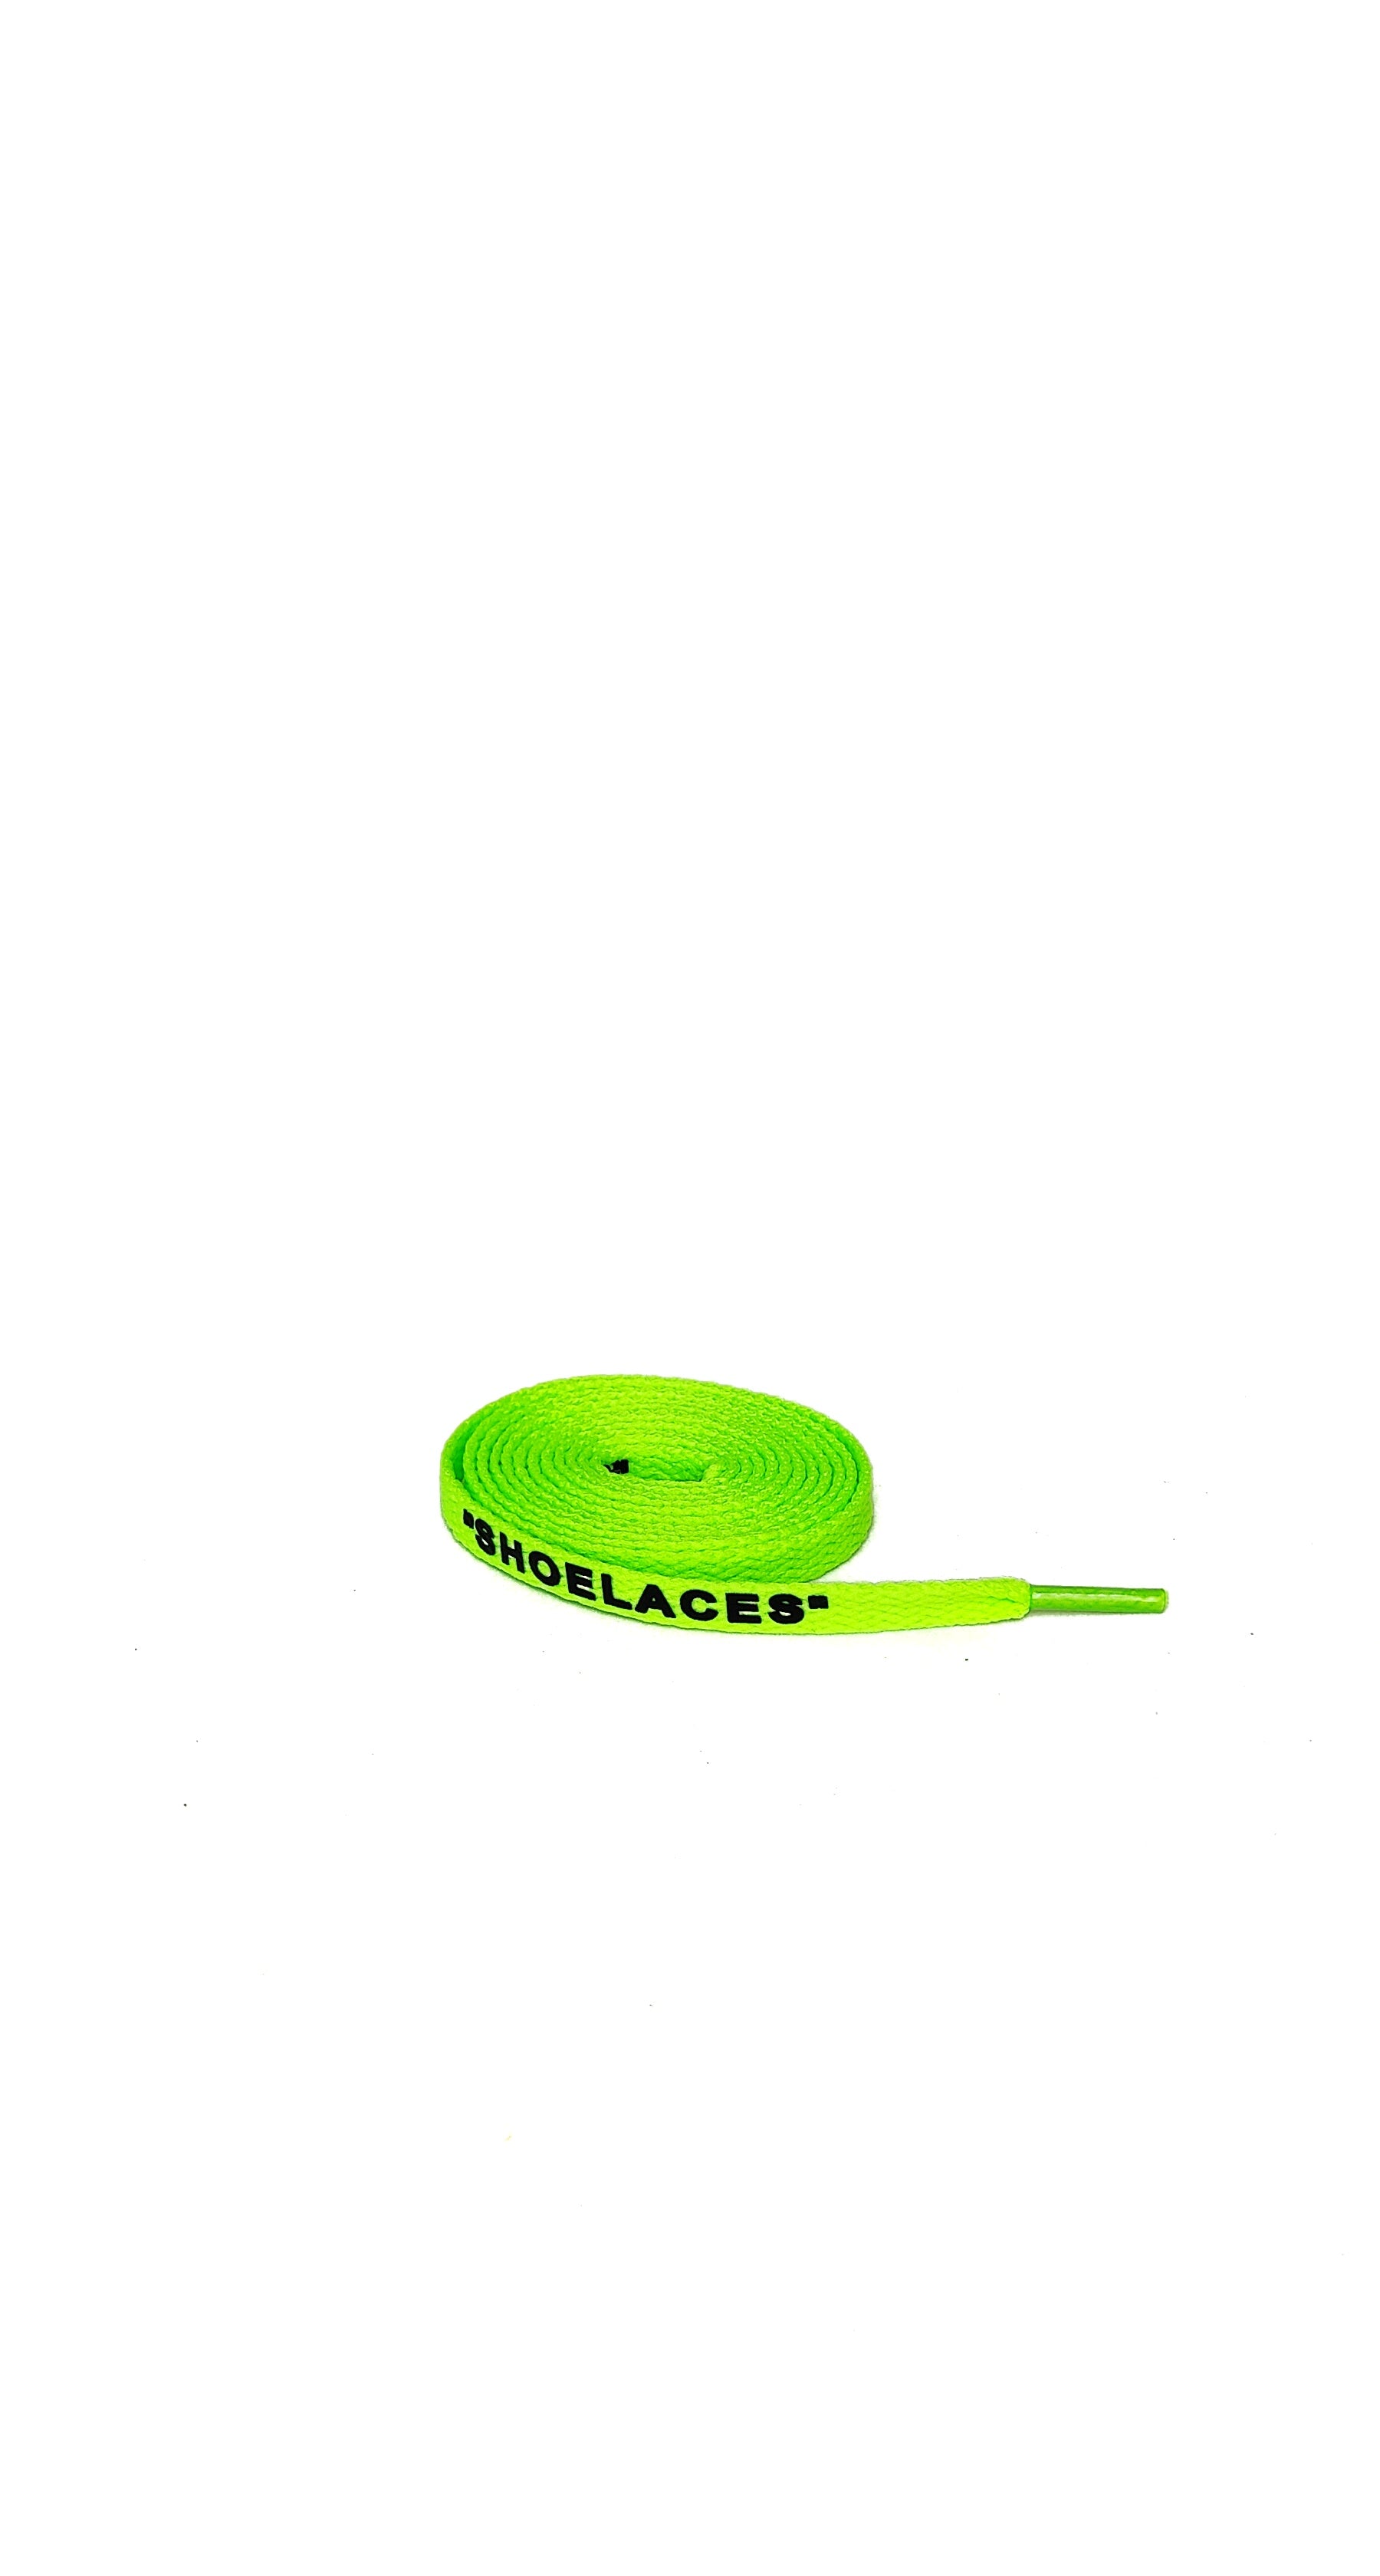 NEON GREEN OFF-WHITE STYLE "SHOELACES" BY TGLC